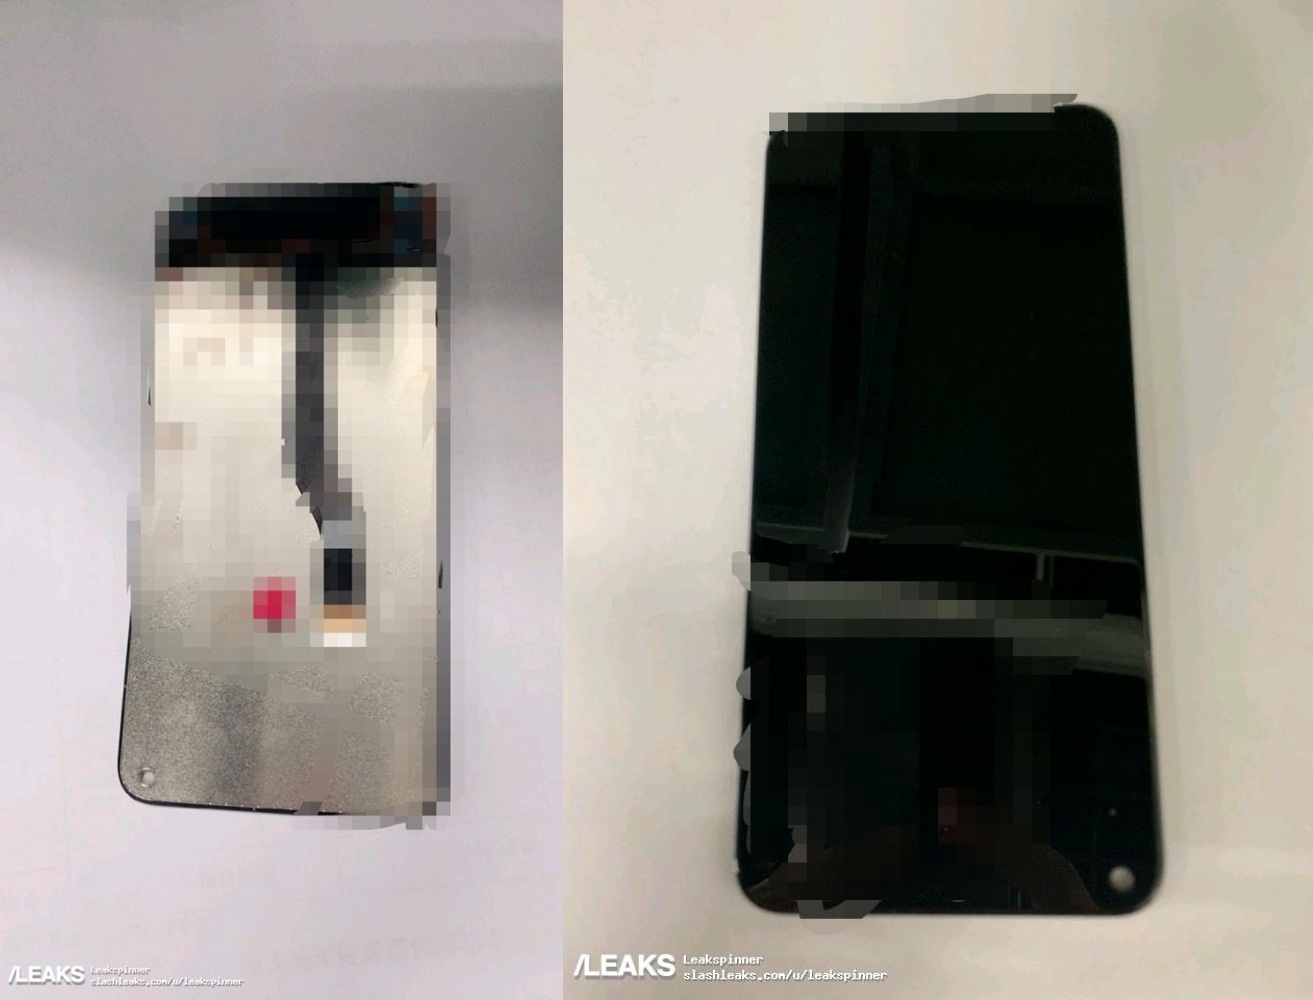 Samsung Infinity-O display with a hole for the selfie cam allegedly pictured